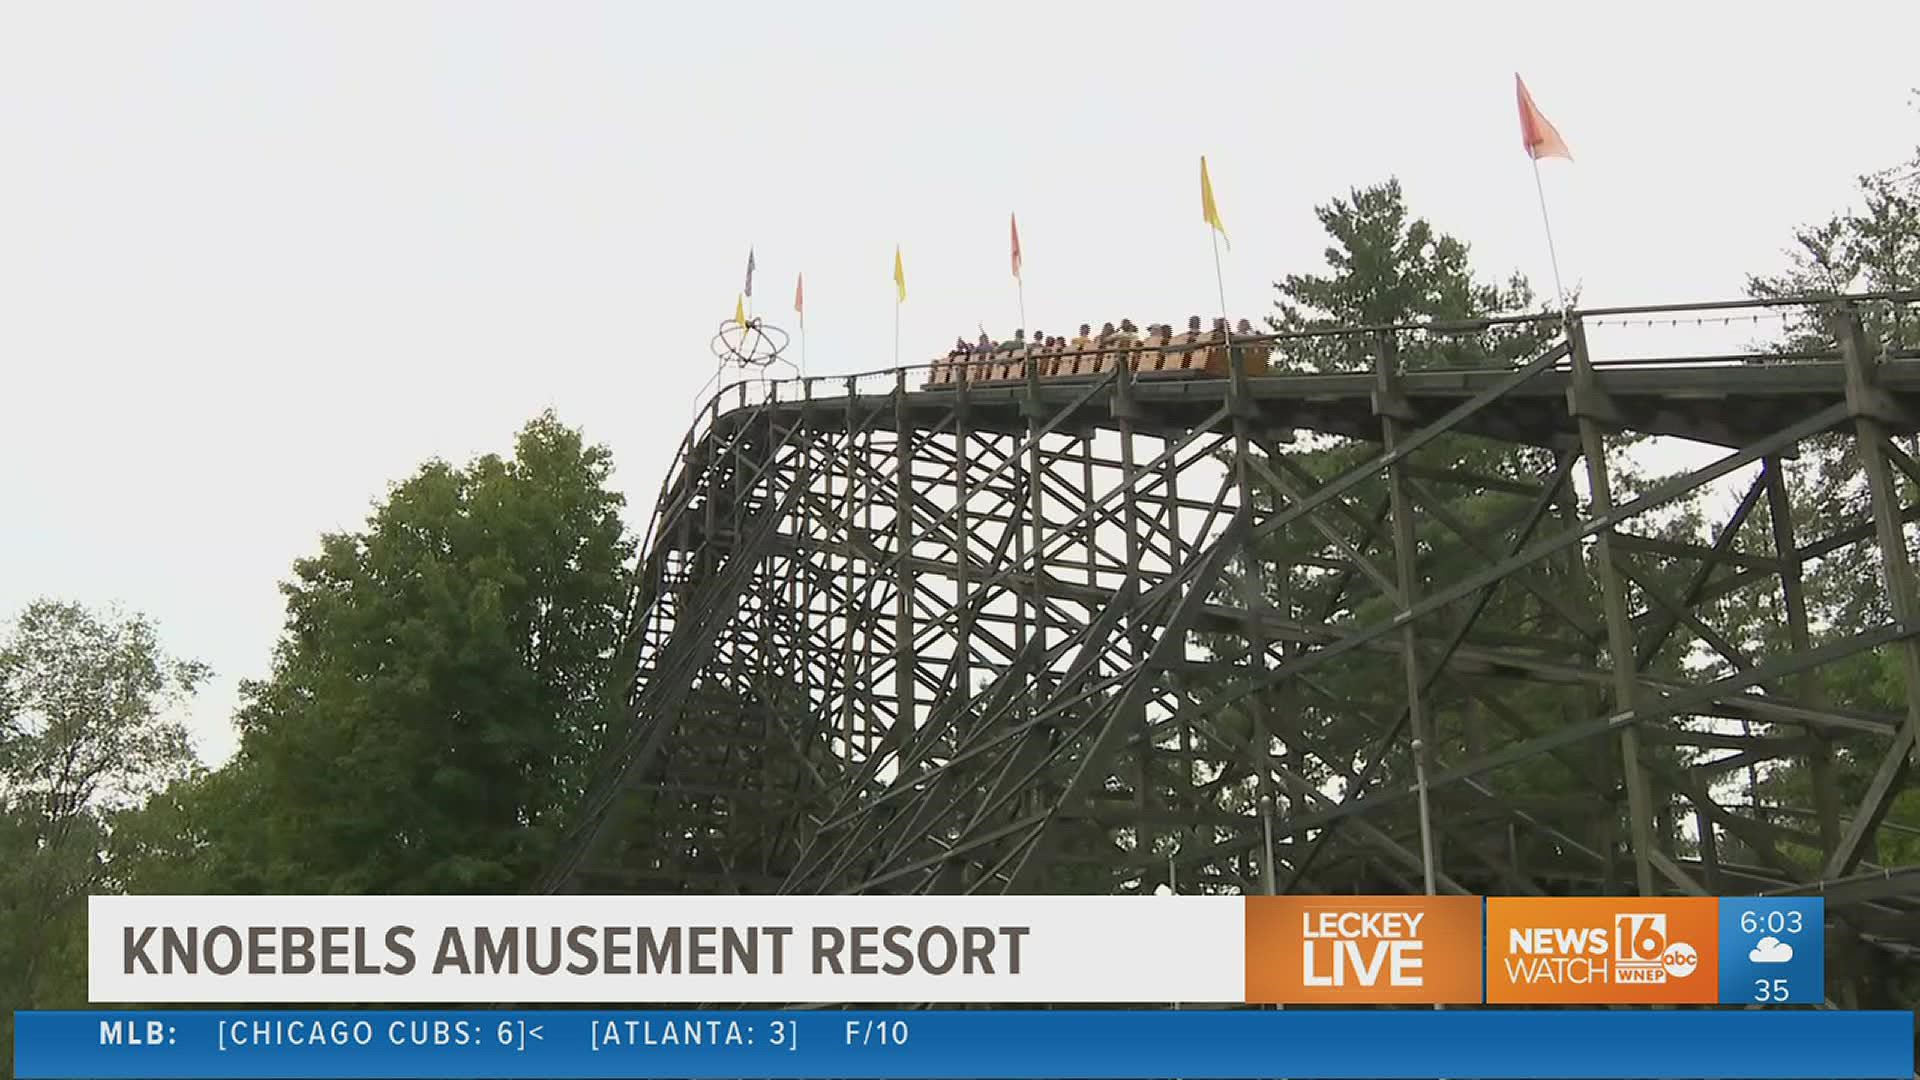 A lot of work has been underway over the past several weeks at Knoebels Amusement Resort in Elysburg. Ryan finds out the history of the iconic sign.